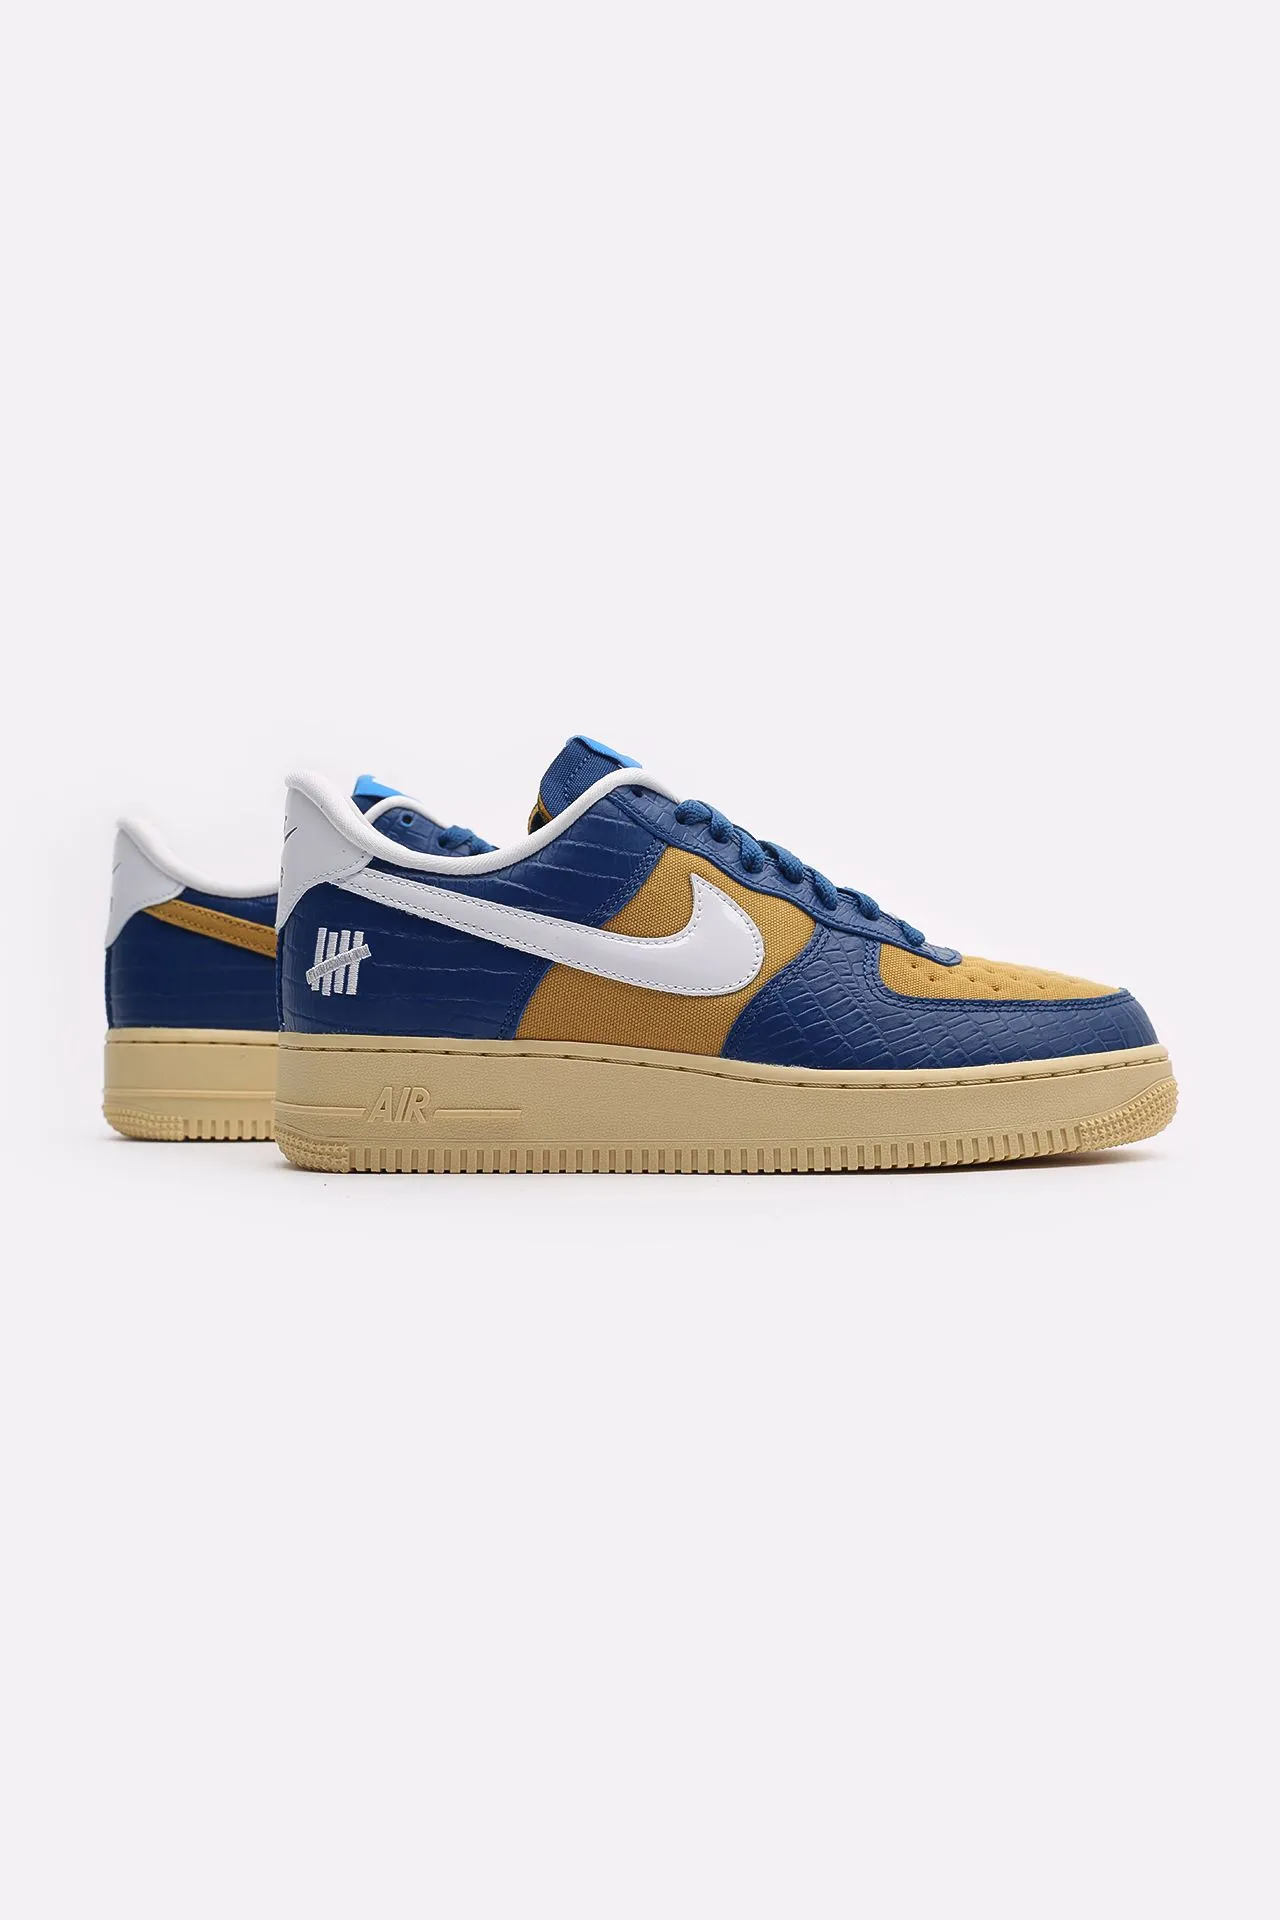 nike x undefeated air force 1 low sp